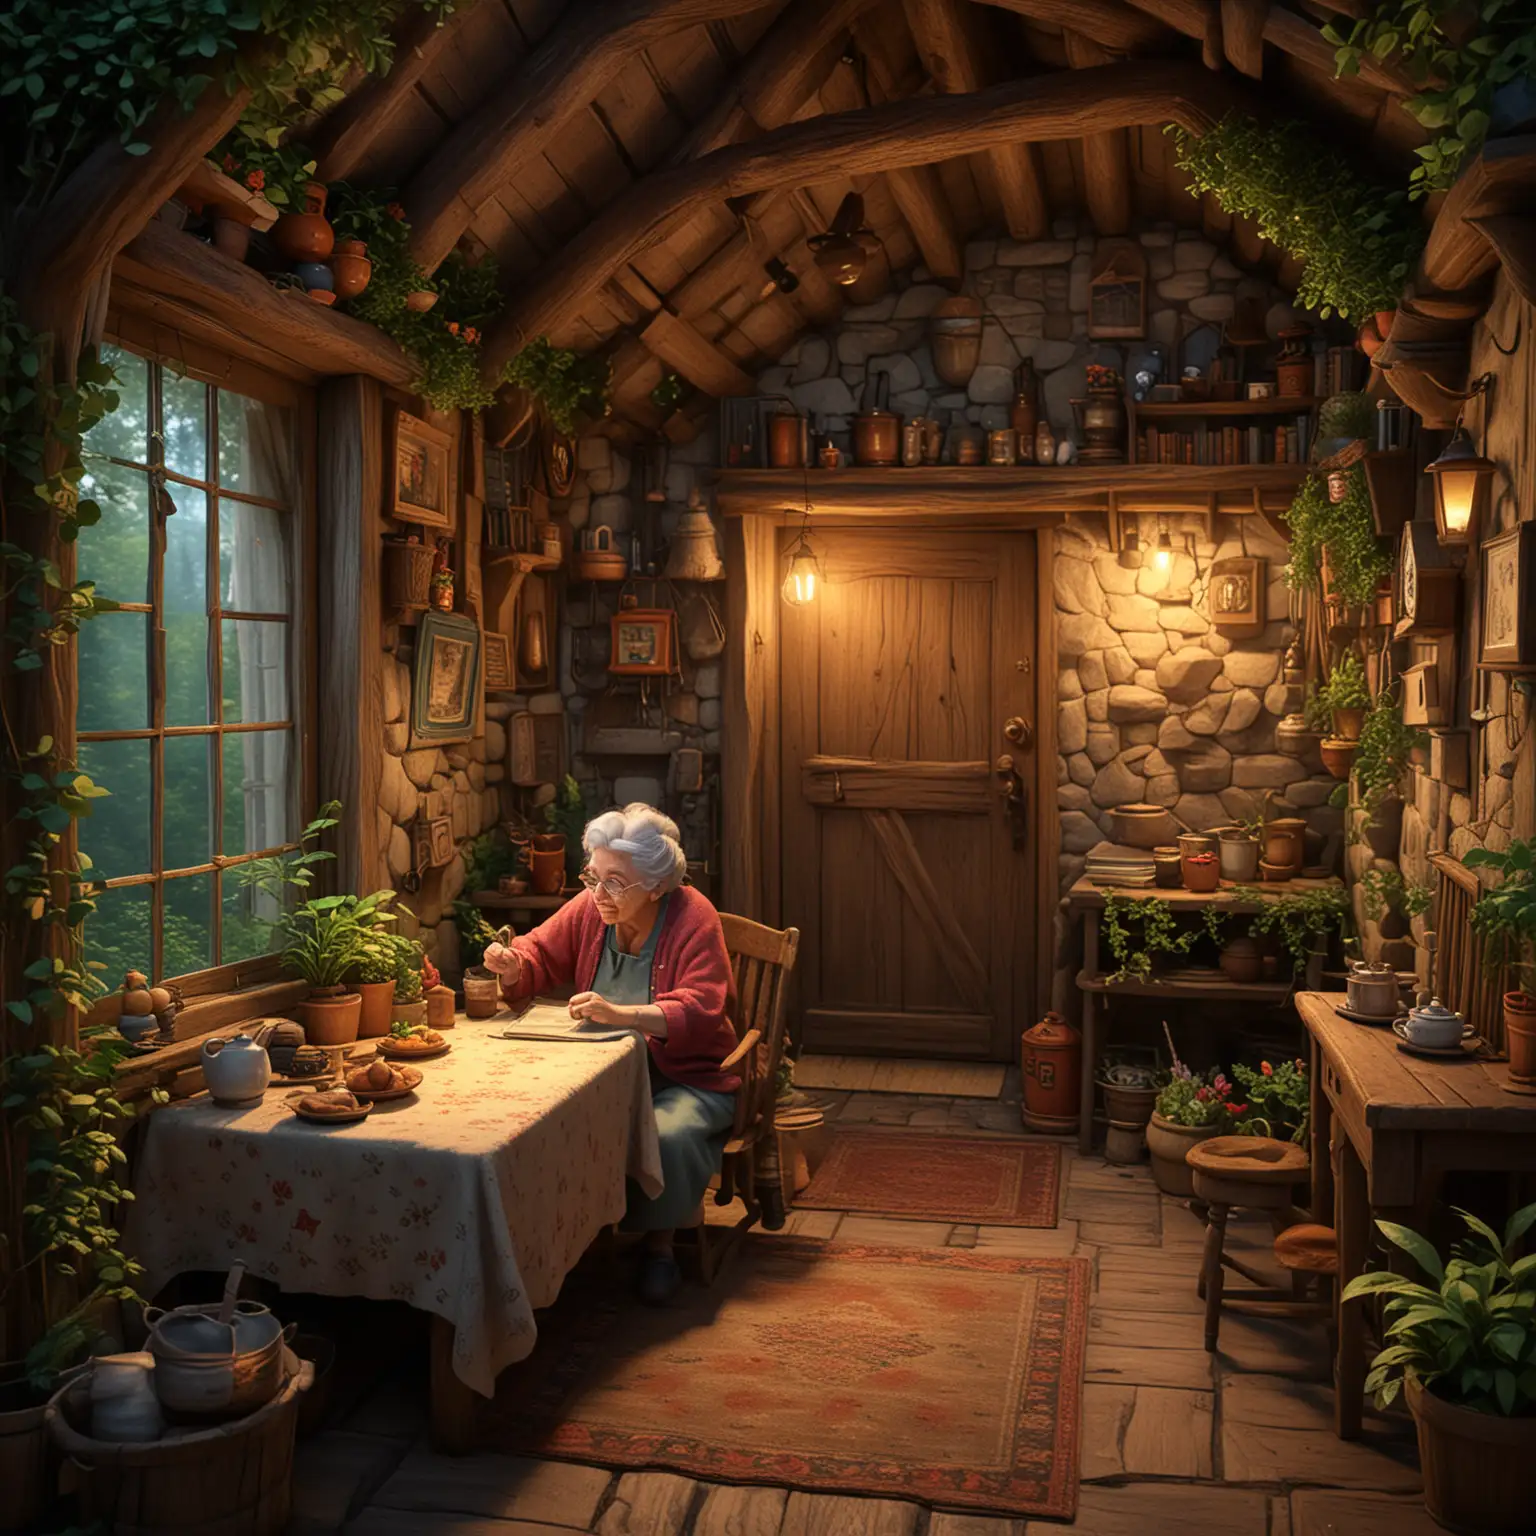 grandmother, in a cozy cottage nestled deep within a magical forest, 3d disney inspire